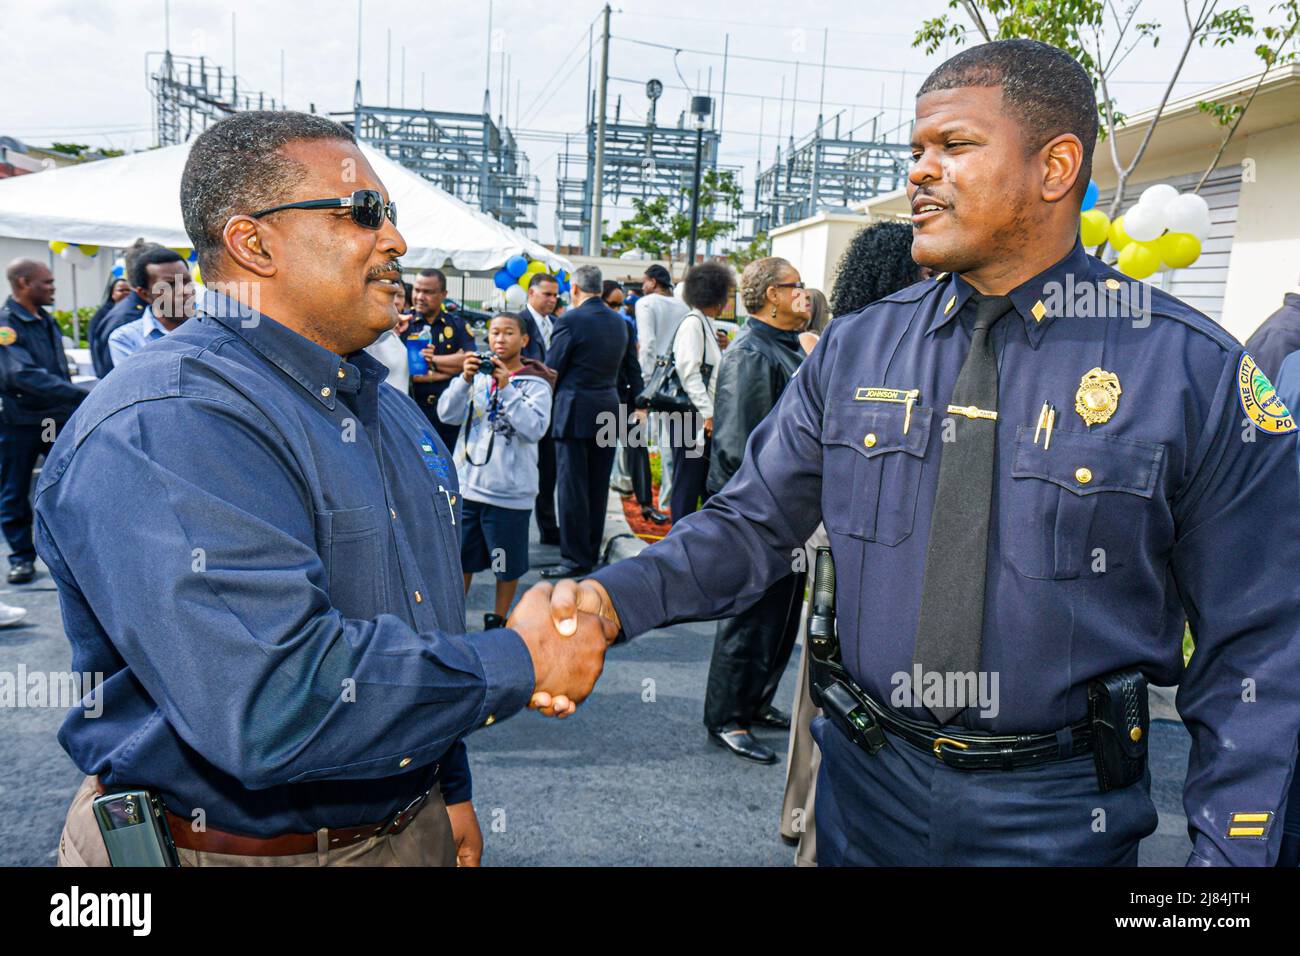 Miami Florida,Overtown,Black Police Precinct & Courthouse Museum,grand opening ceremony community history,men police officers handshake shaking hands Stock Photo